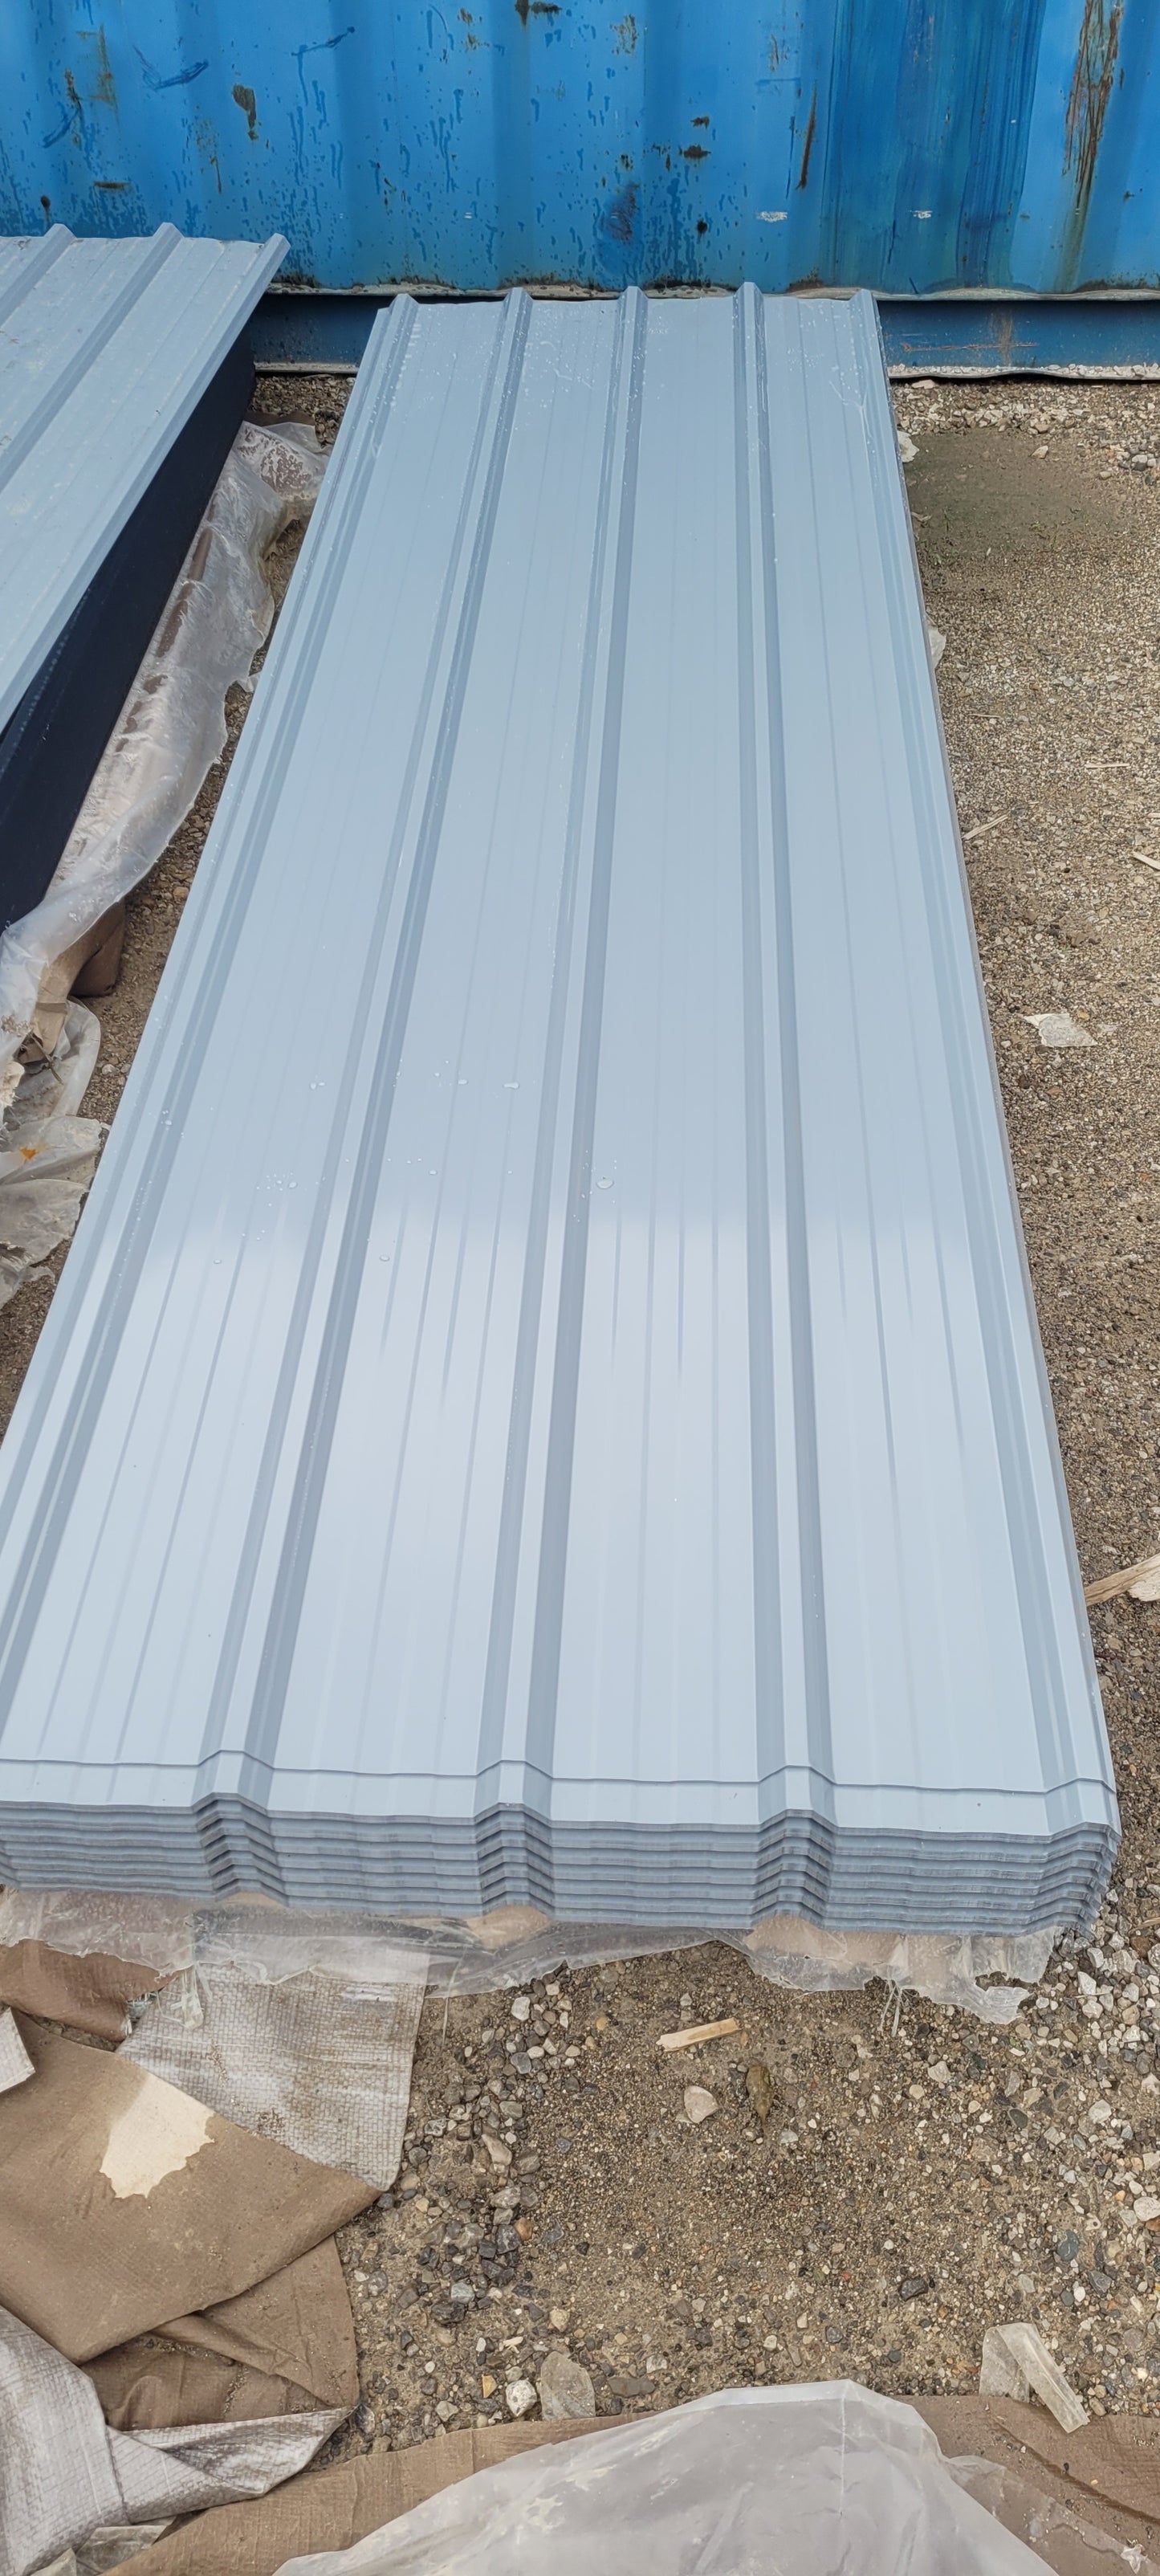 NEW SCRATCH AND DENT! STEEL SIDING/ROOFING 29 GAUGE!  10, 12, 16 FT LENGTHS!$1.10 per sq foot